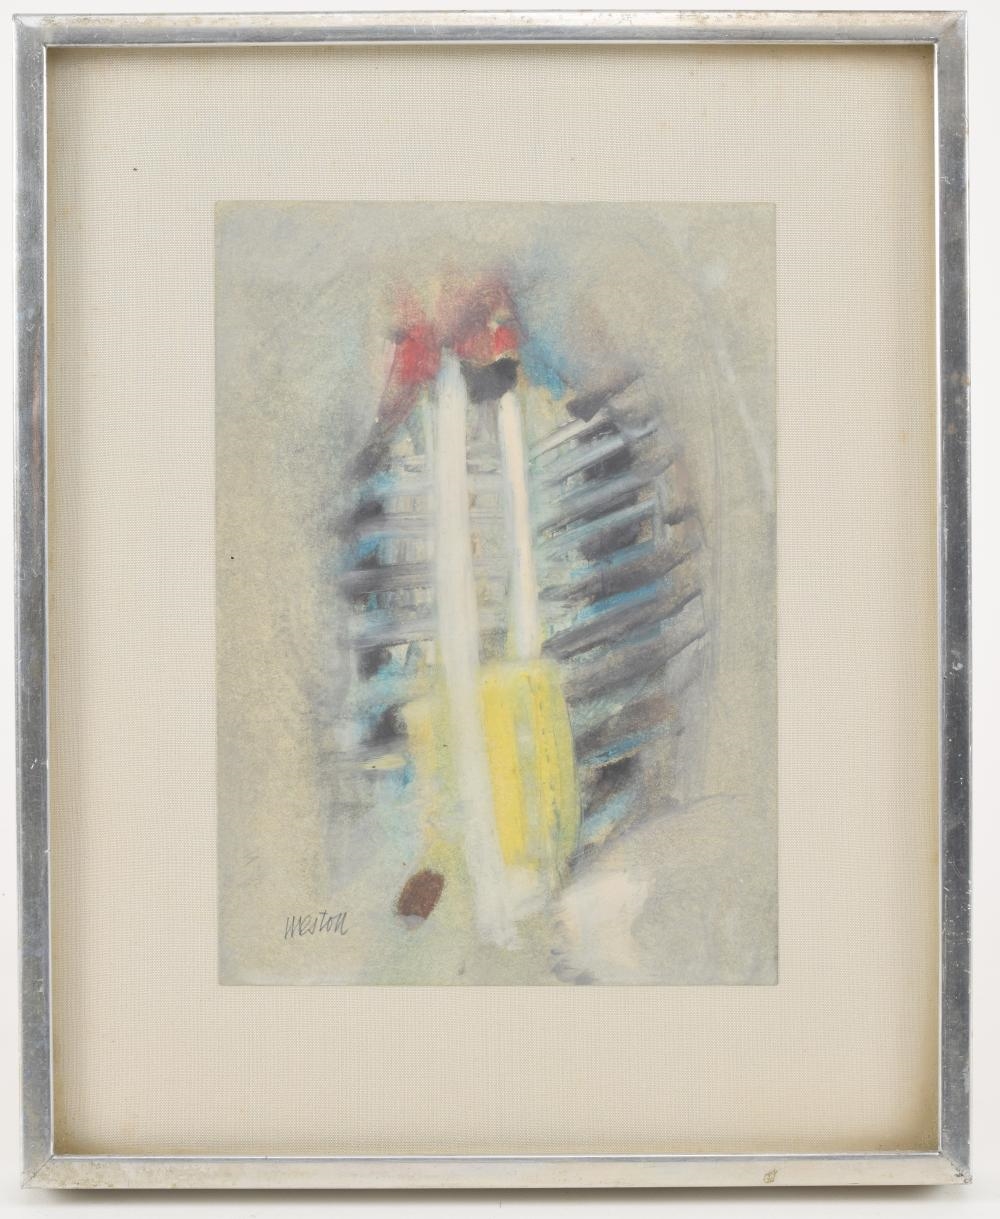 Edward Weston. Original small mixed media abstract painting. Signed lower left. Sight: 7 x 5in. Overall: 10.5 x 8.5in - Edward Weston